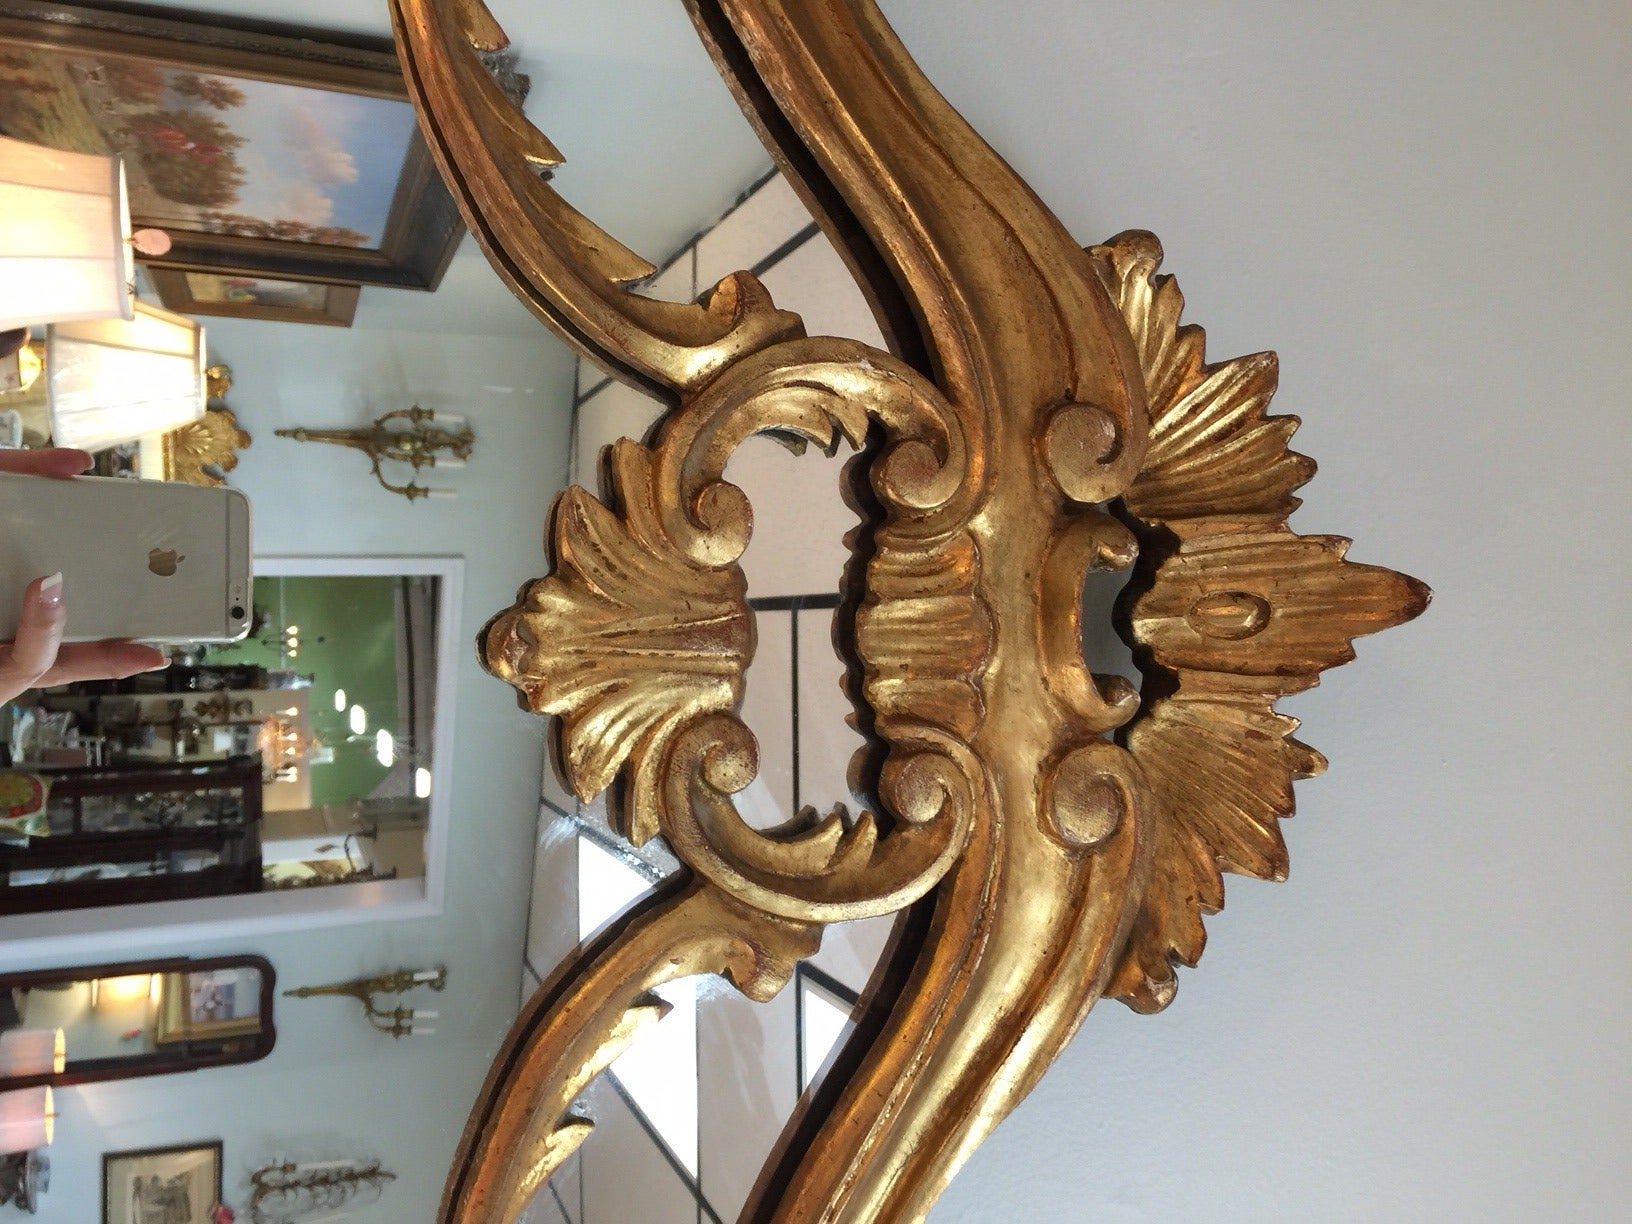 Regency style statement mirror is elaborately carved and sweetly gilded. It is in perfect vintage condition.